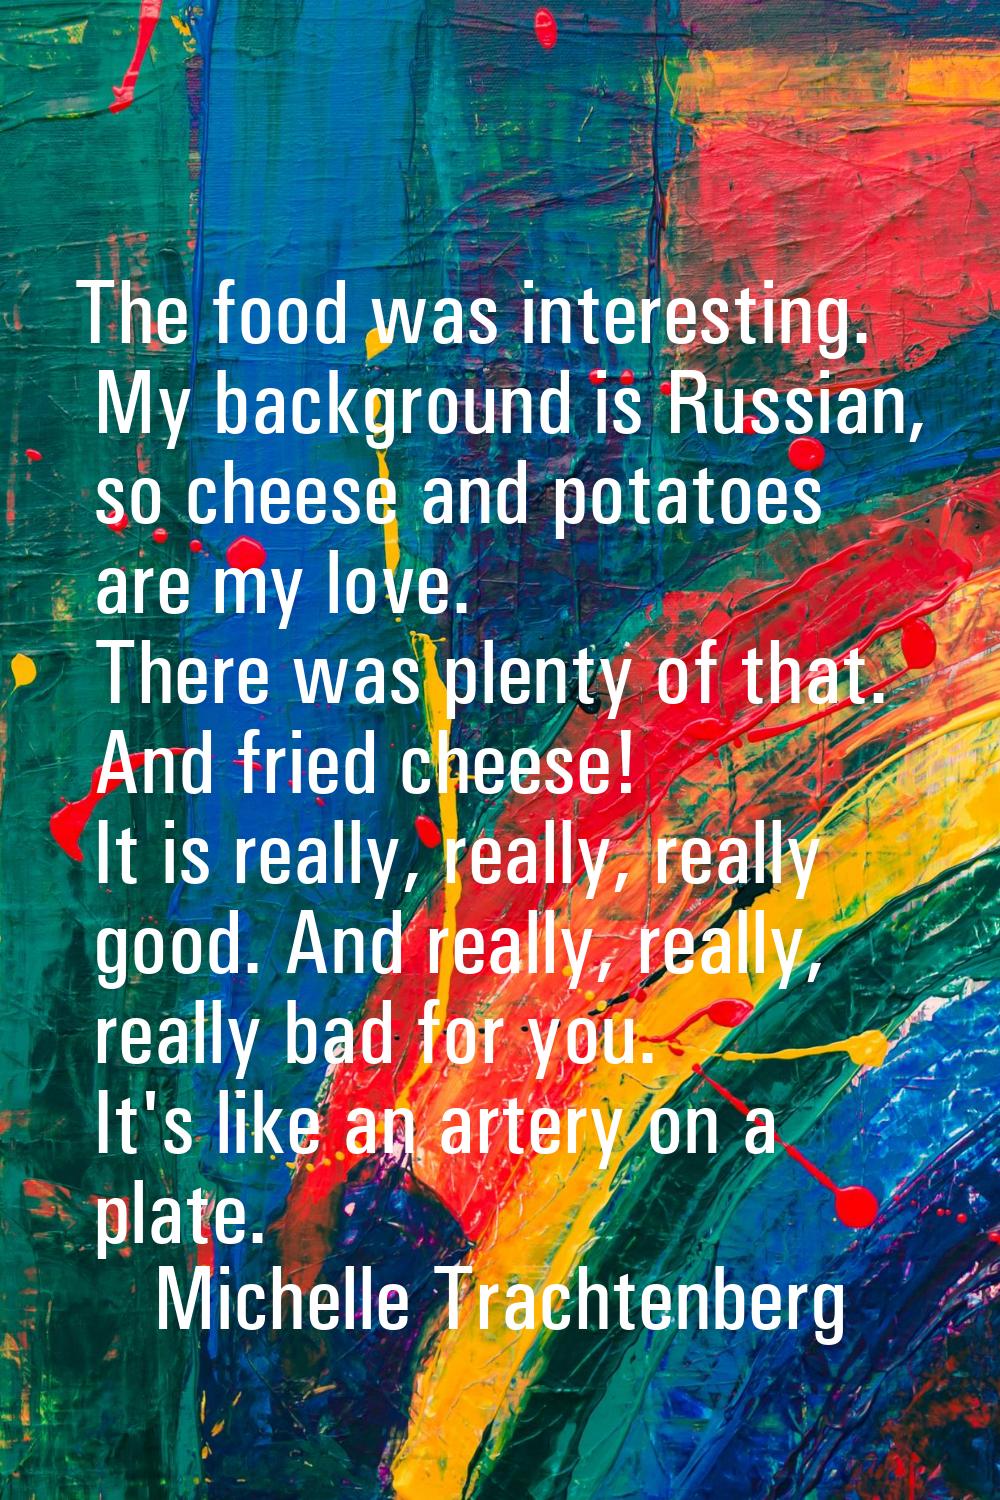 The food was interesting. My background is Russian, so cheese and potatoes are my love. There was p